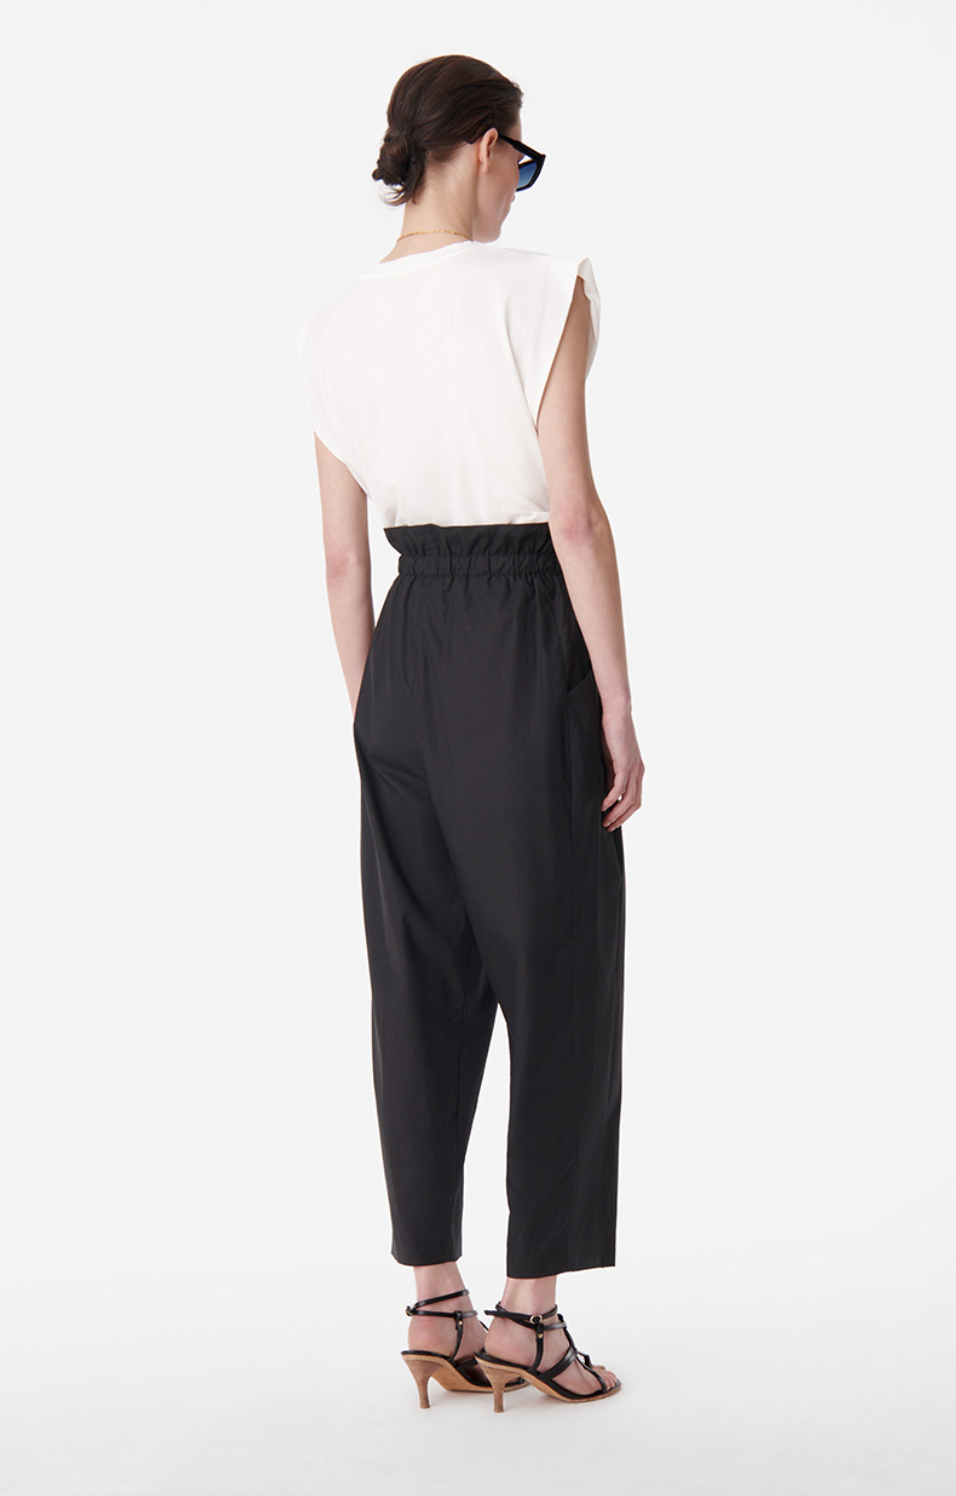 Vanessa Bruno - Casimir Black High-Waisted Trousers Media 2 of 4